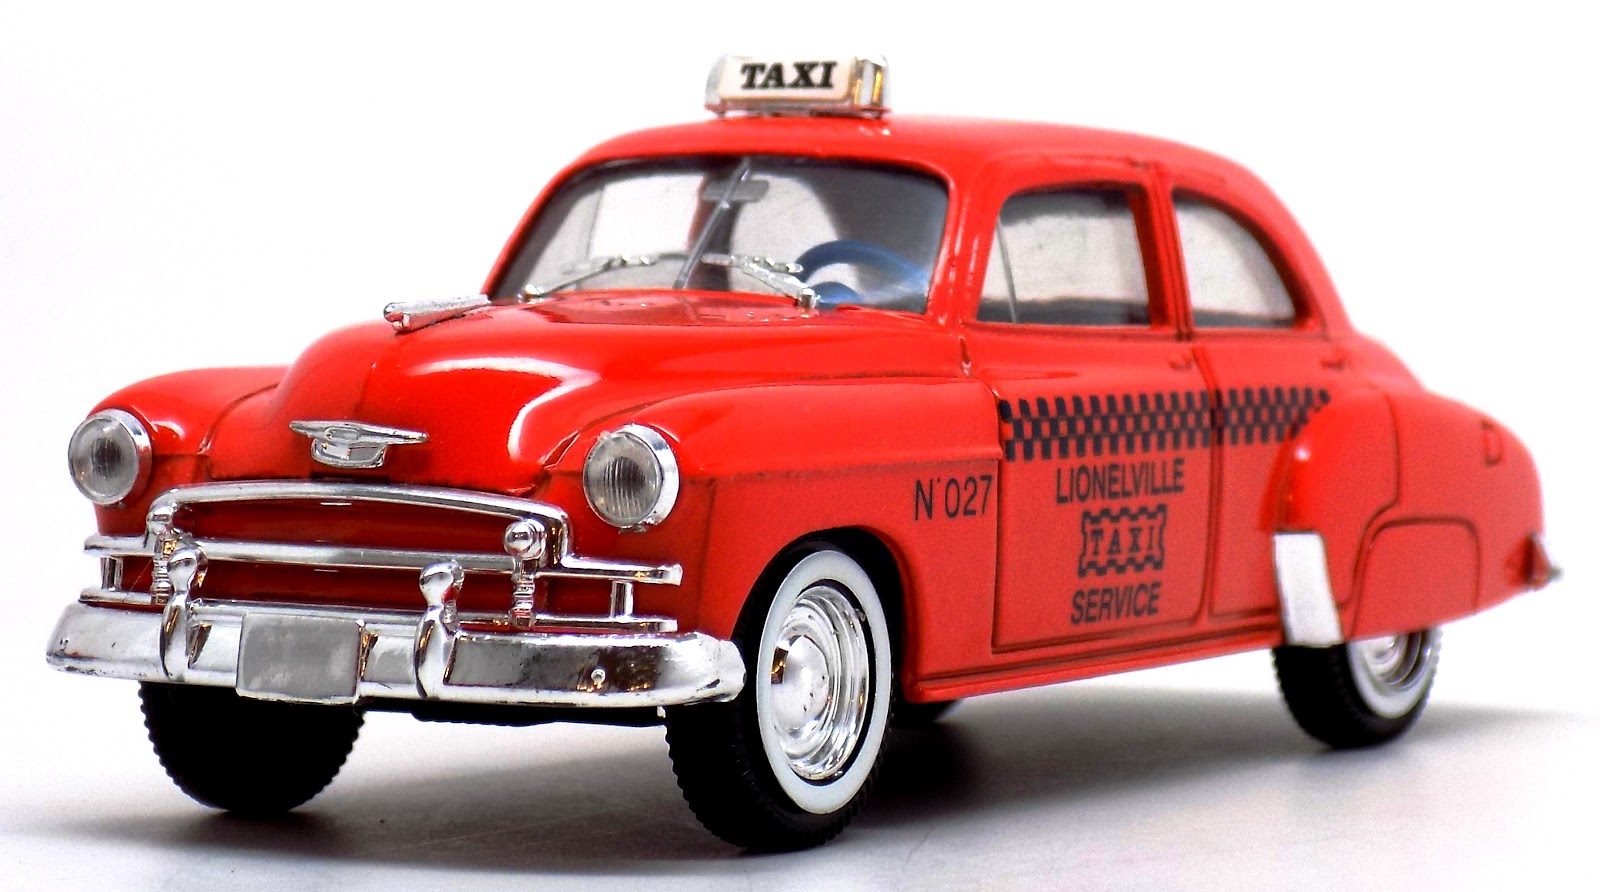 Toys and Stuff: Solido 1/43 Diecast Lionelville 1950 Chevy Taxi